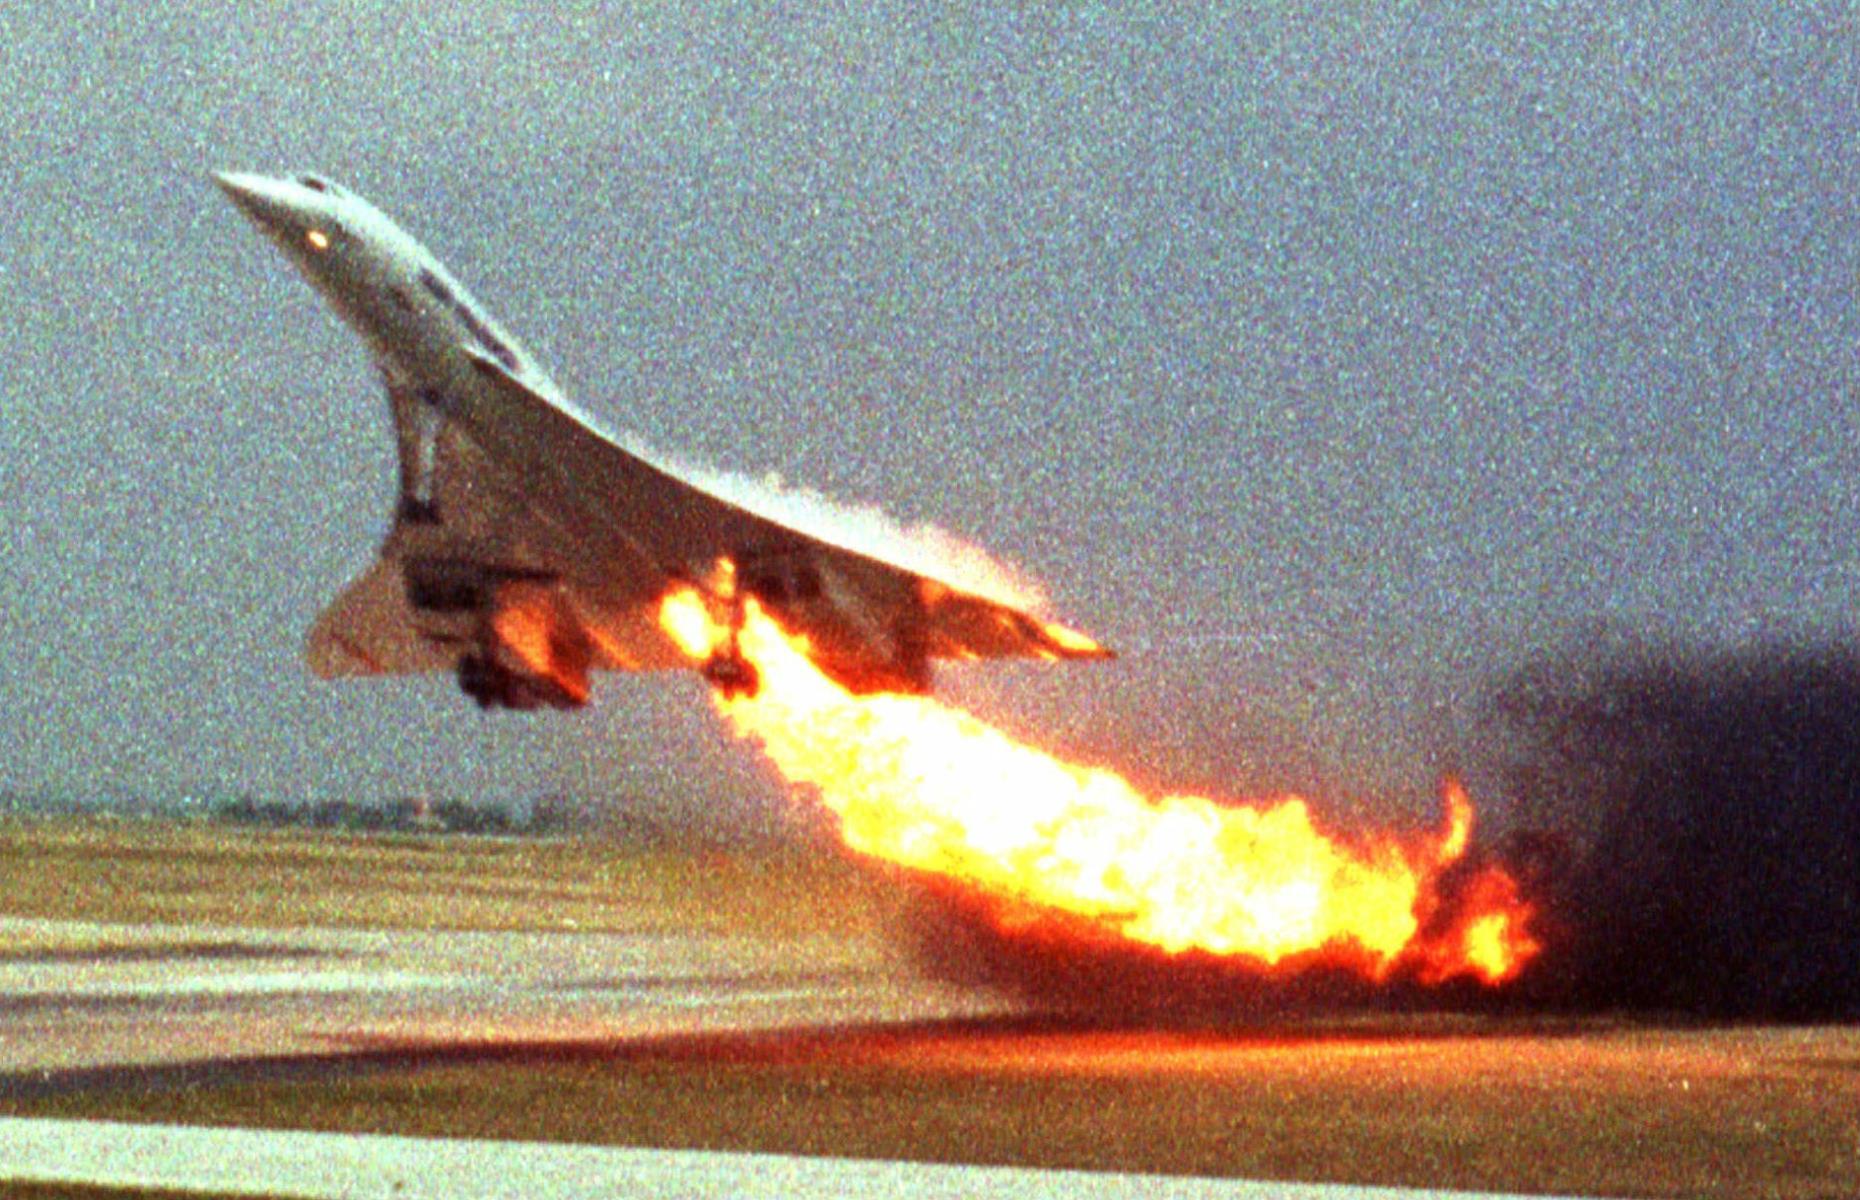 2000: Concorde crashes while taking off from Paris